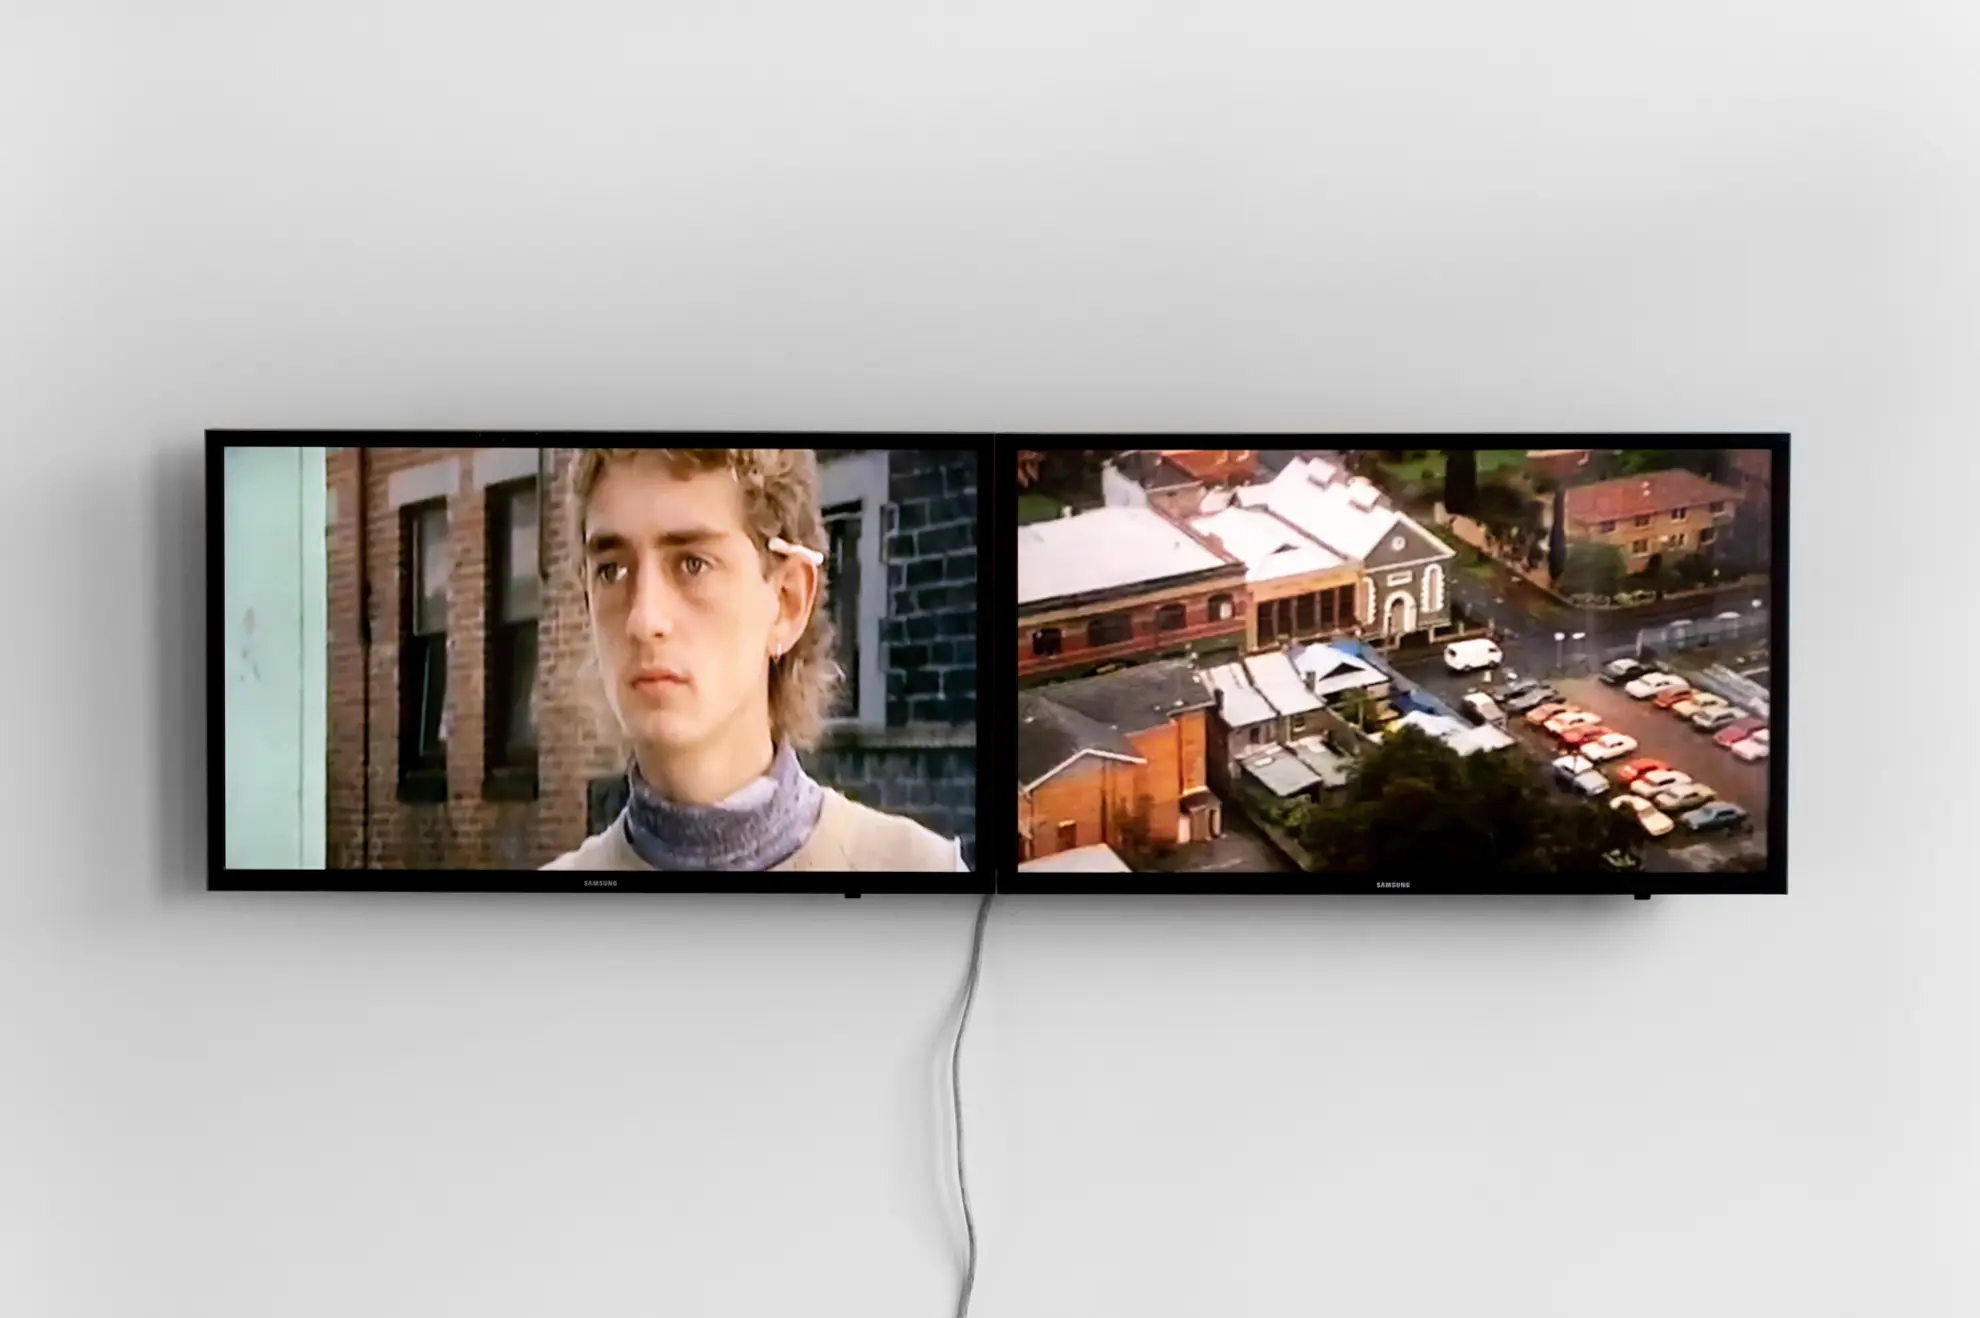 Two rectangular screens sit side by side, hanging on a white wall. The left screen shows a person looking off to the side, with blonde curly hair and a cigarette behind their ear. On the right screen is an aerial view of several buildings and a busy carpark.